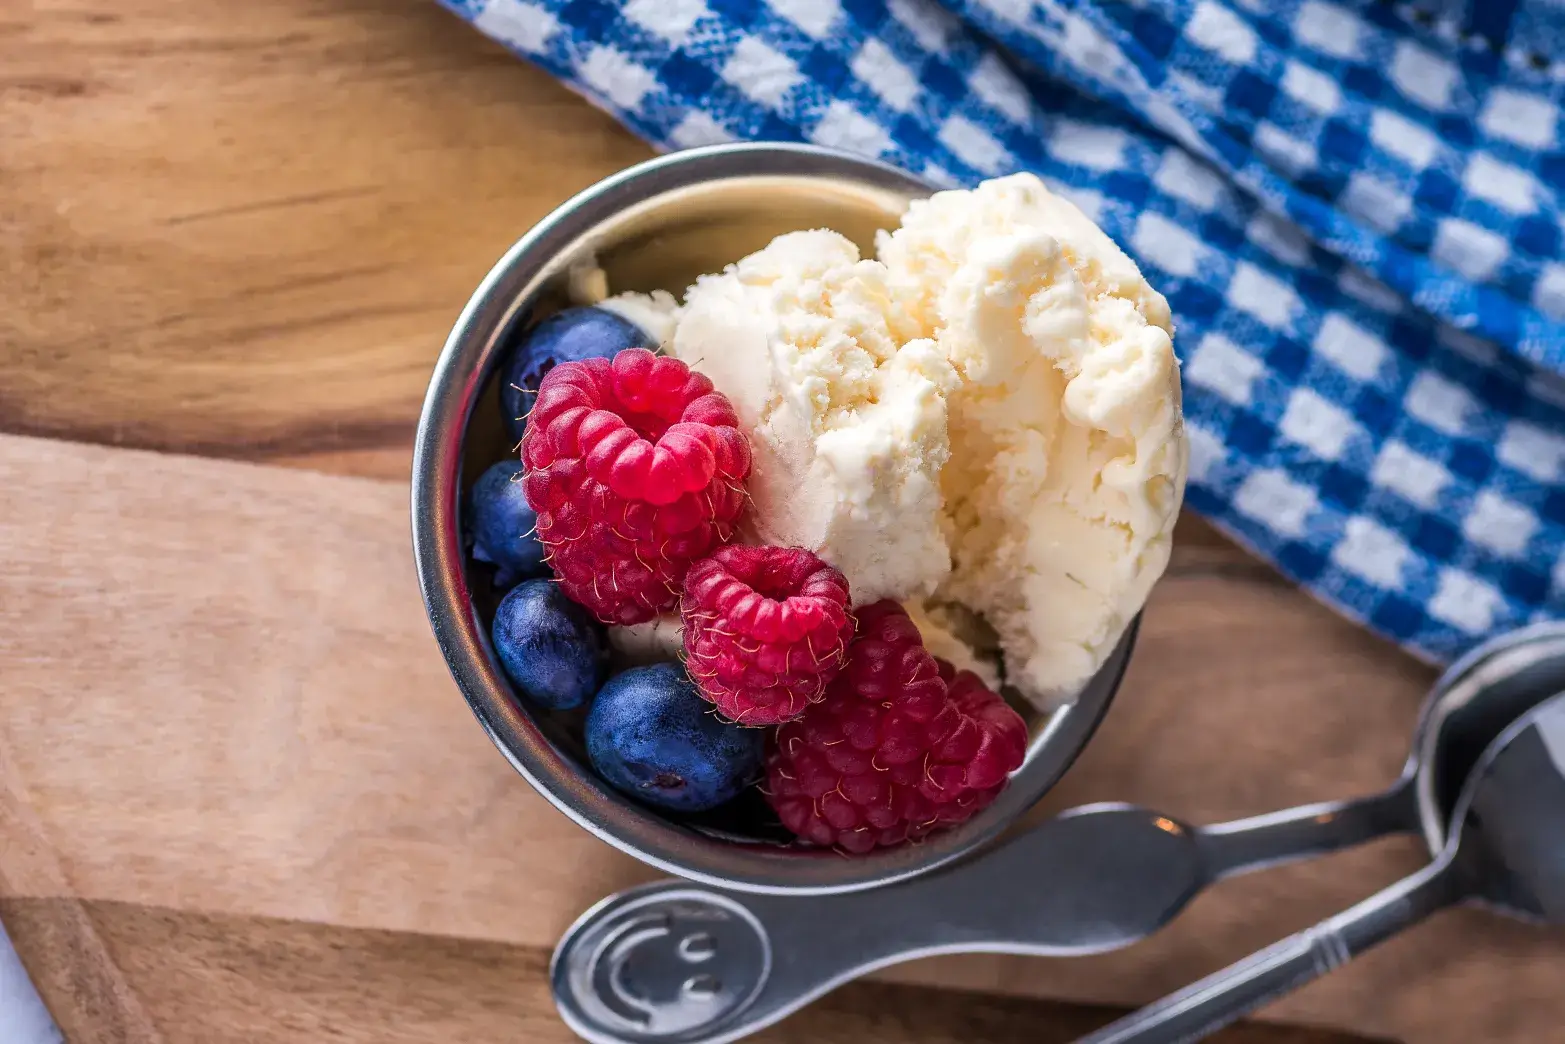 bowl of ice cream with blueberries and raspberries